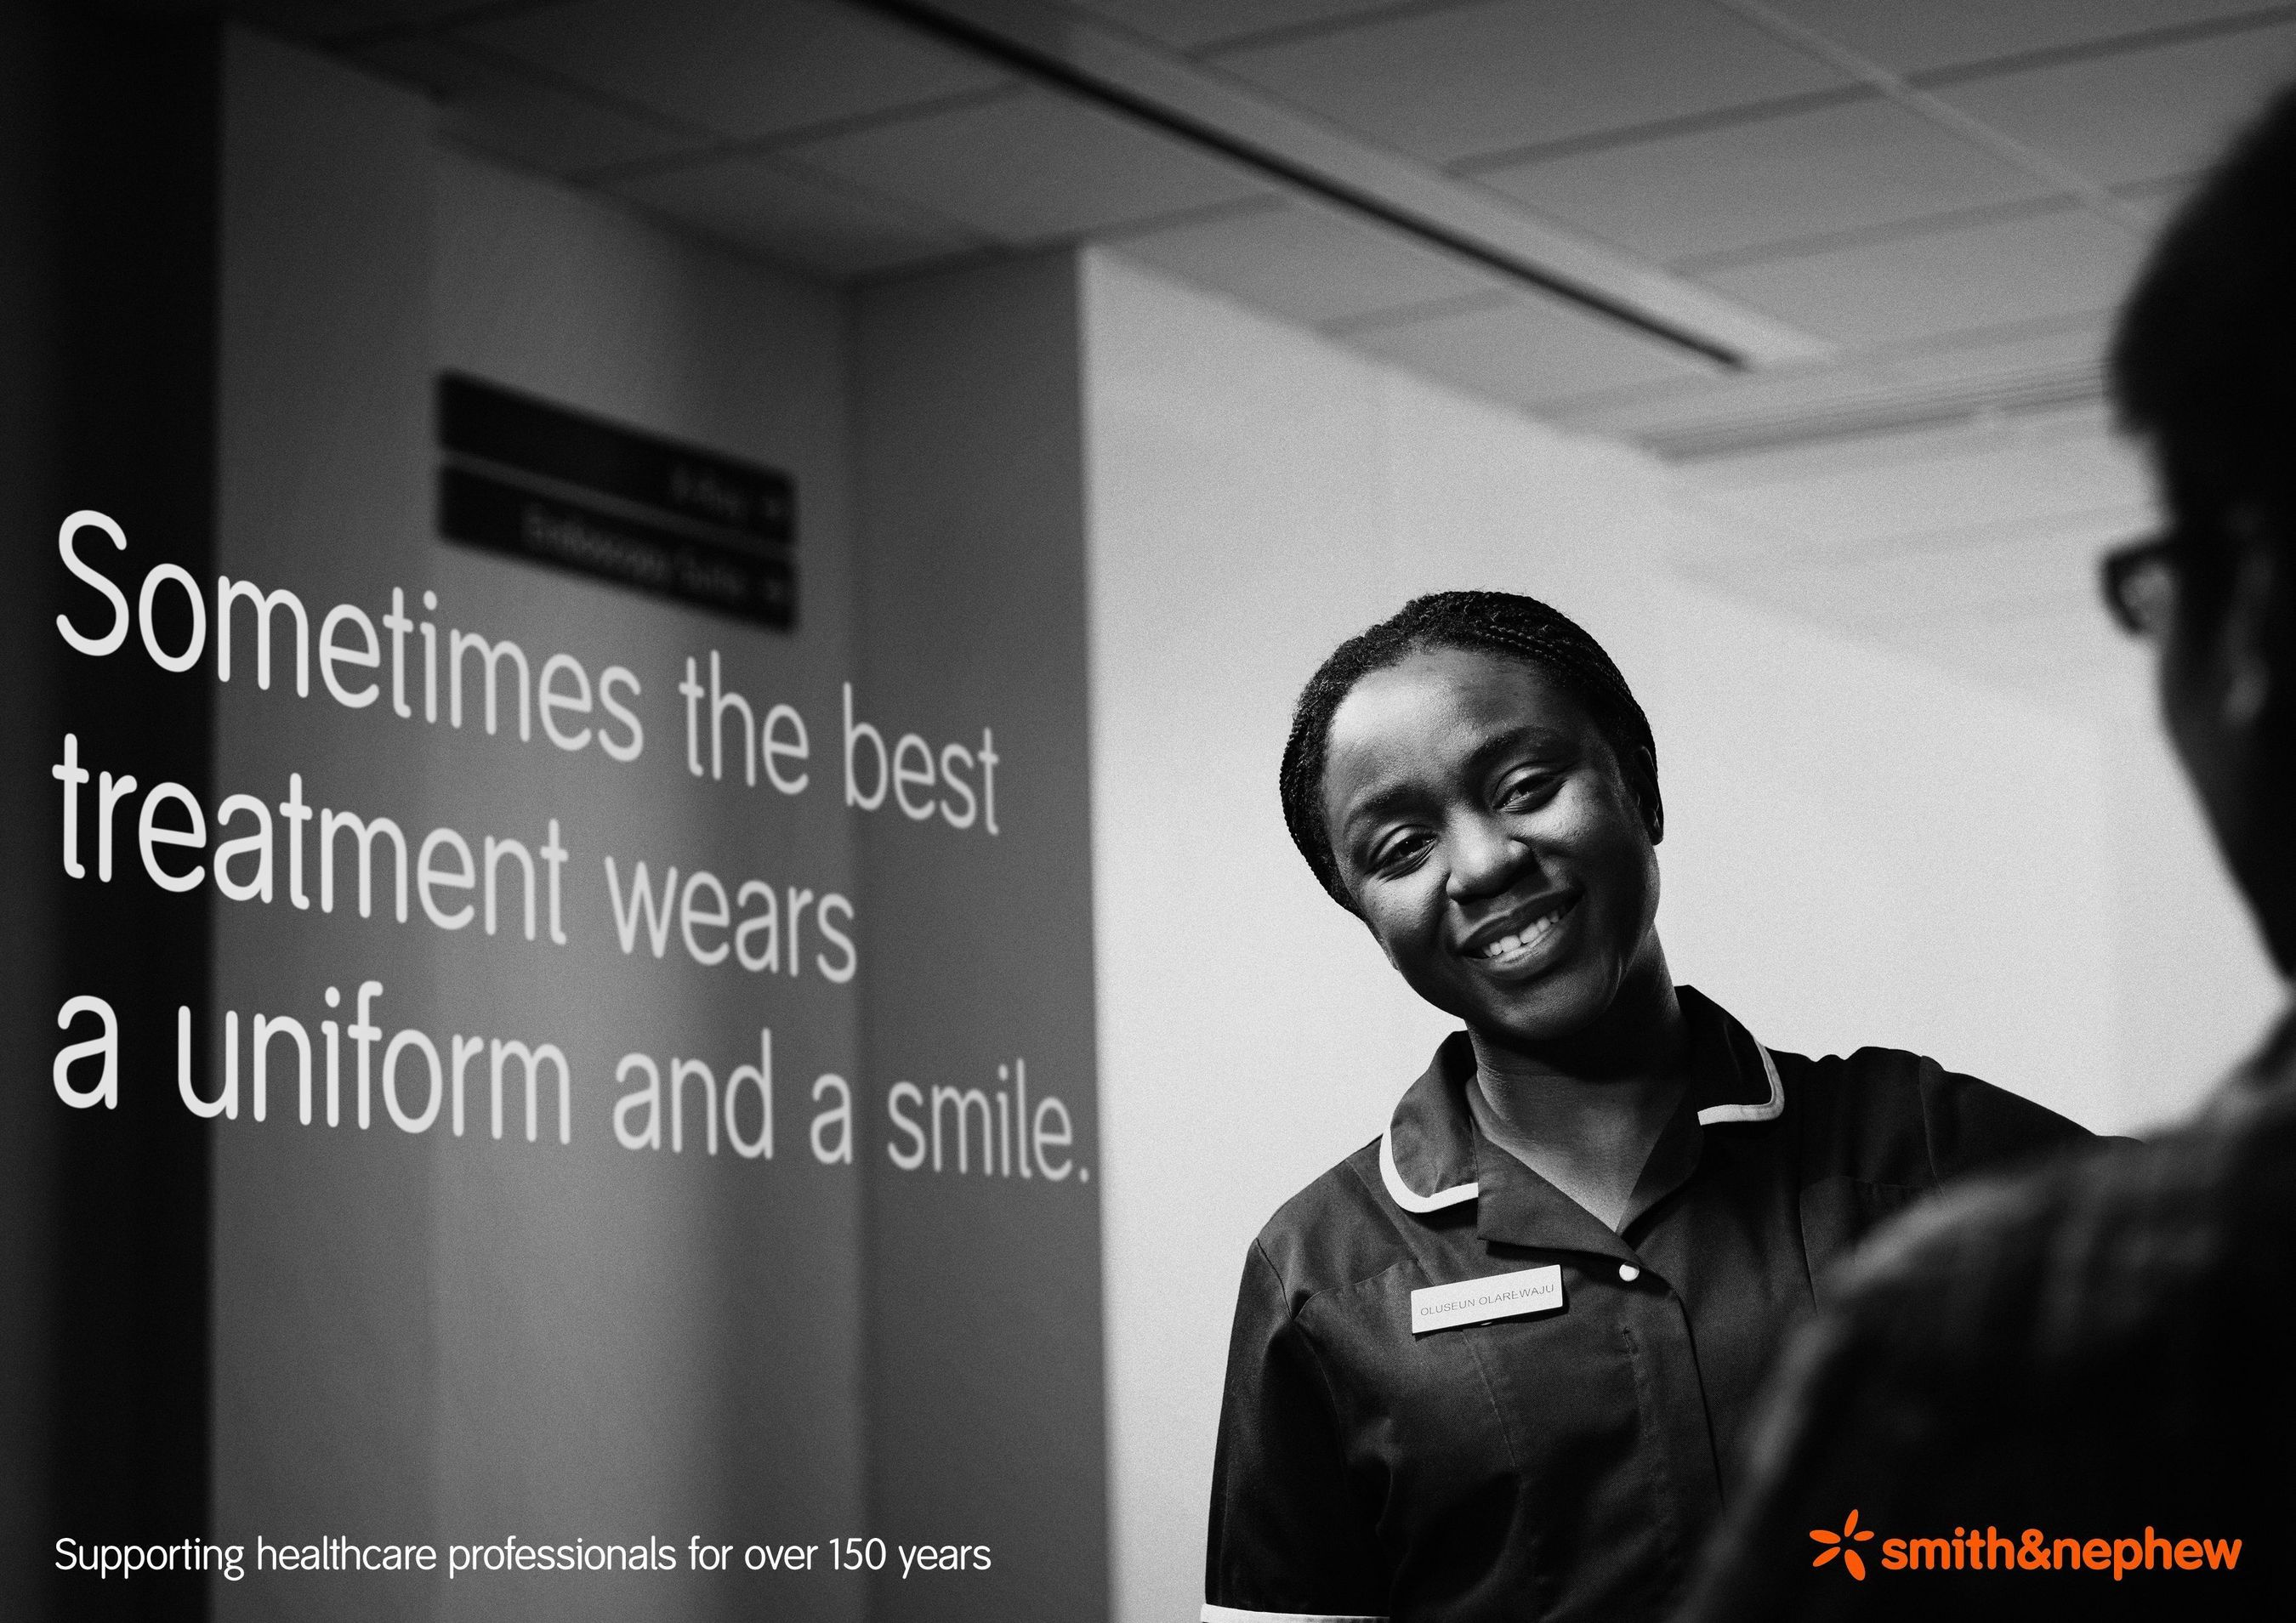 Championing our healthcare professionals: Smith & Nephew launches awareness campaign (PRNewsFoto/Smith & Nephew plc)